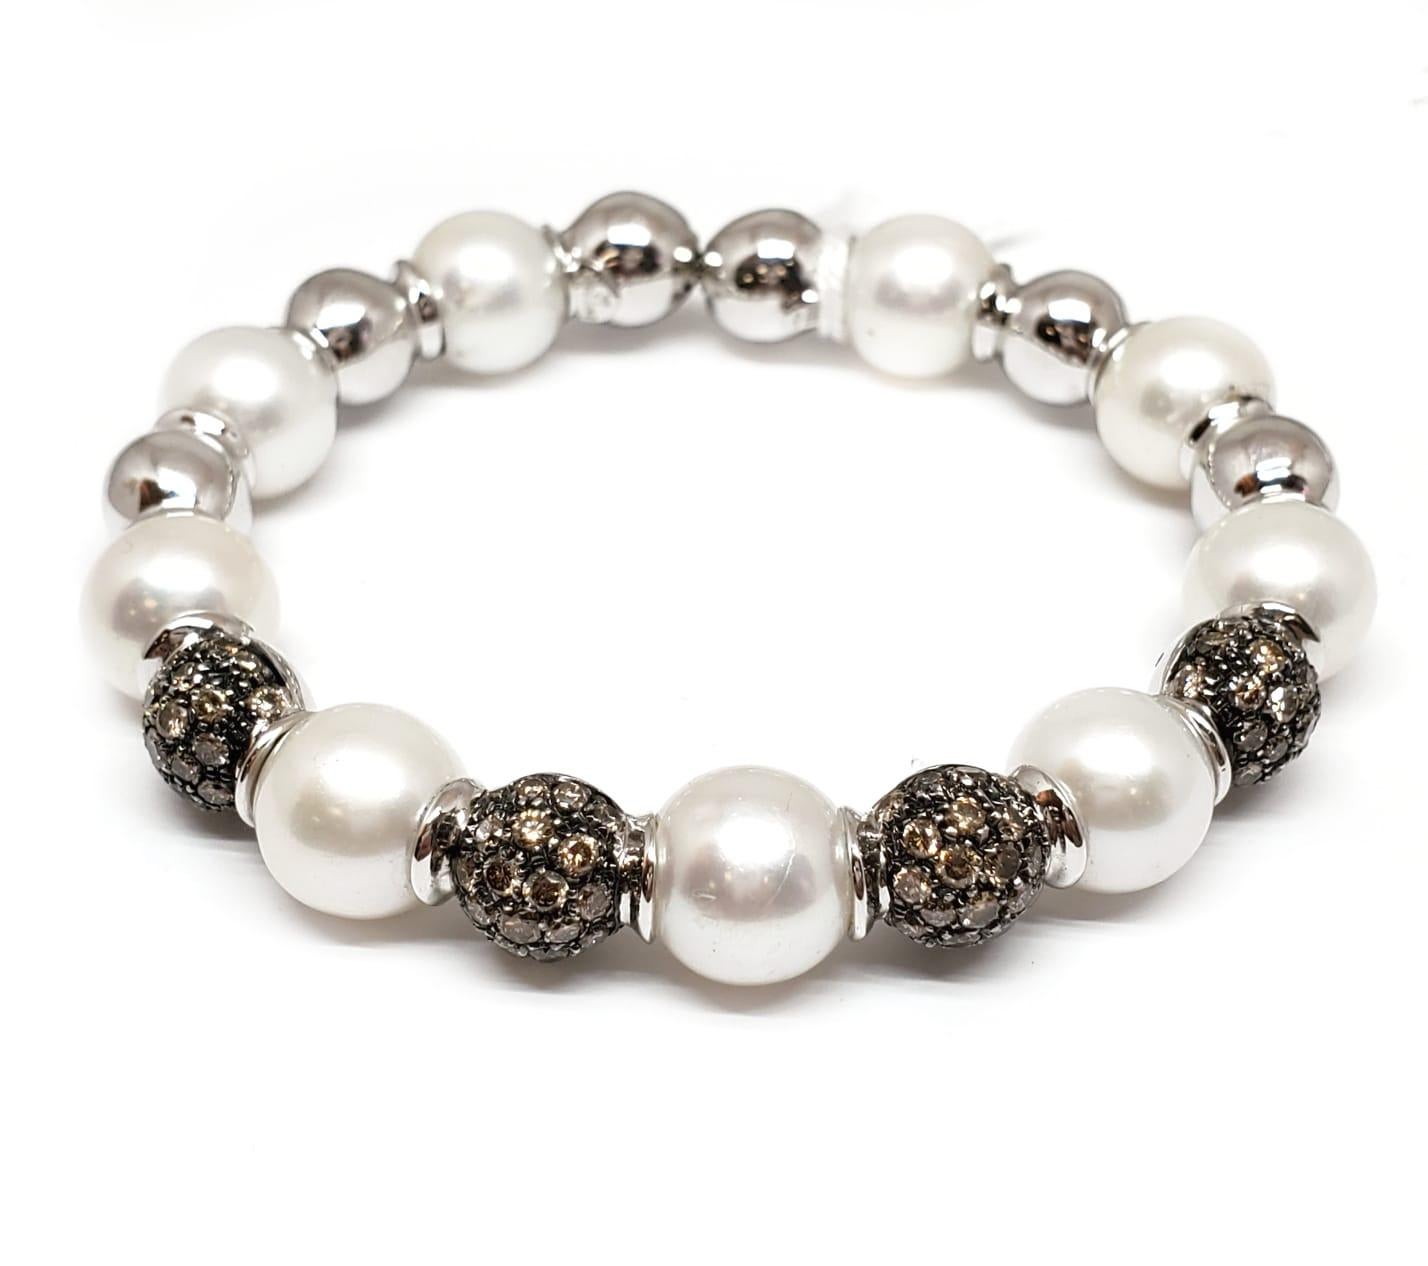 Andreoli Brown Diamond South Sea Pearl 18 Karat Gold Bracelet

This bracelet features:
- 3.38 Carat Brown Diamond
- South Sea Pearl
- 39.65 Gram 18K White Gold
- Made In Italy